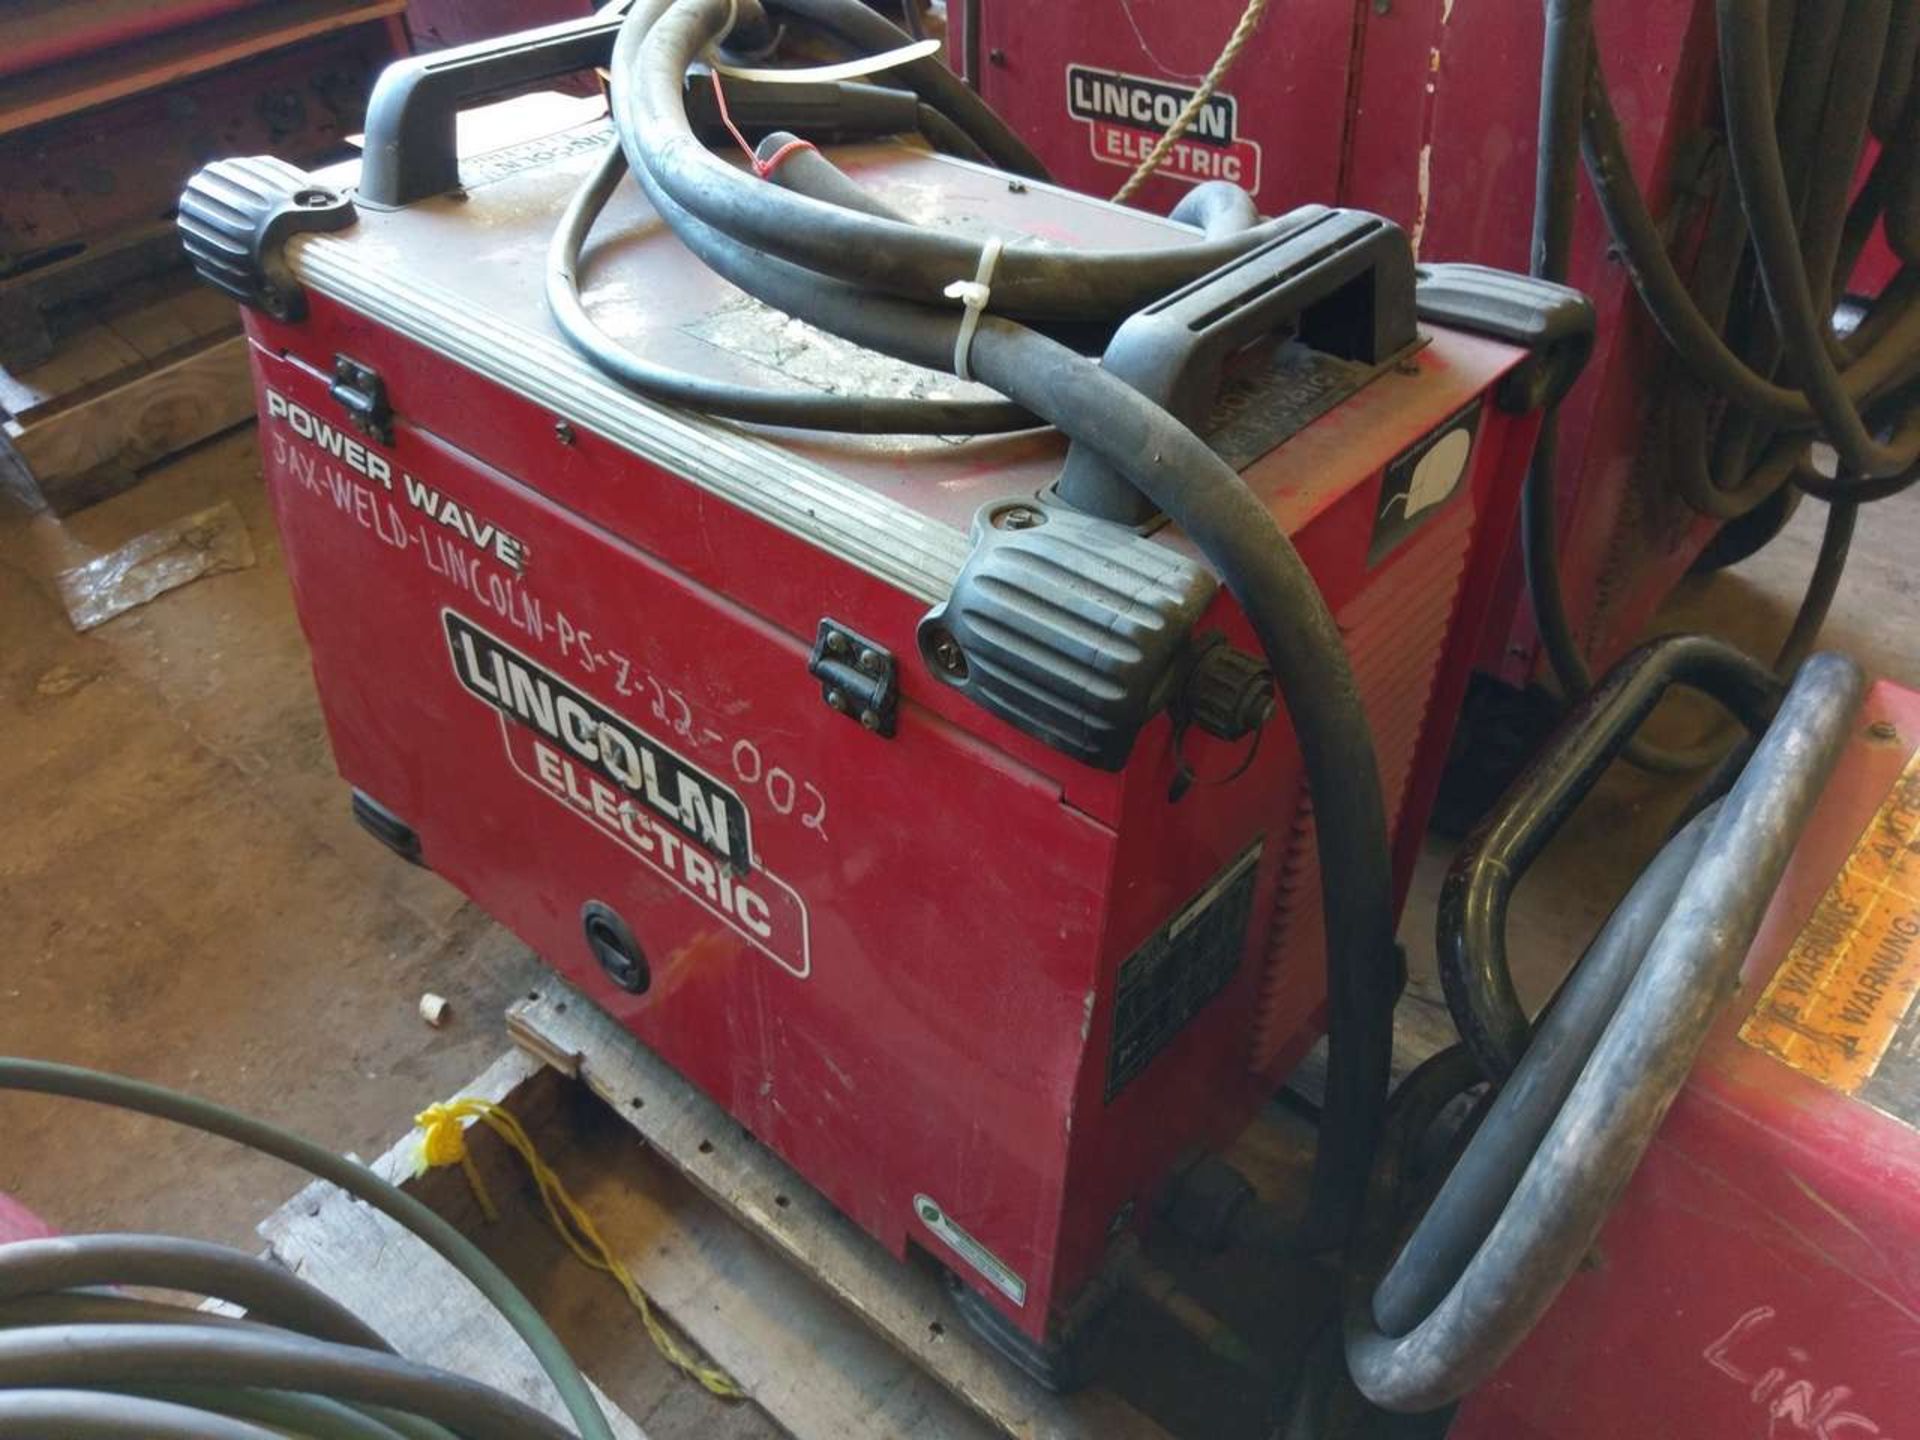 Lincoln Electric C300 Powerwave Welding Power Source - Image 4 of 5